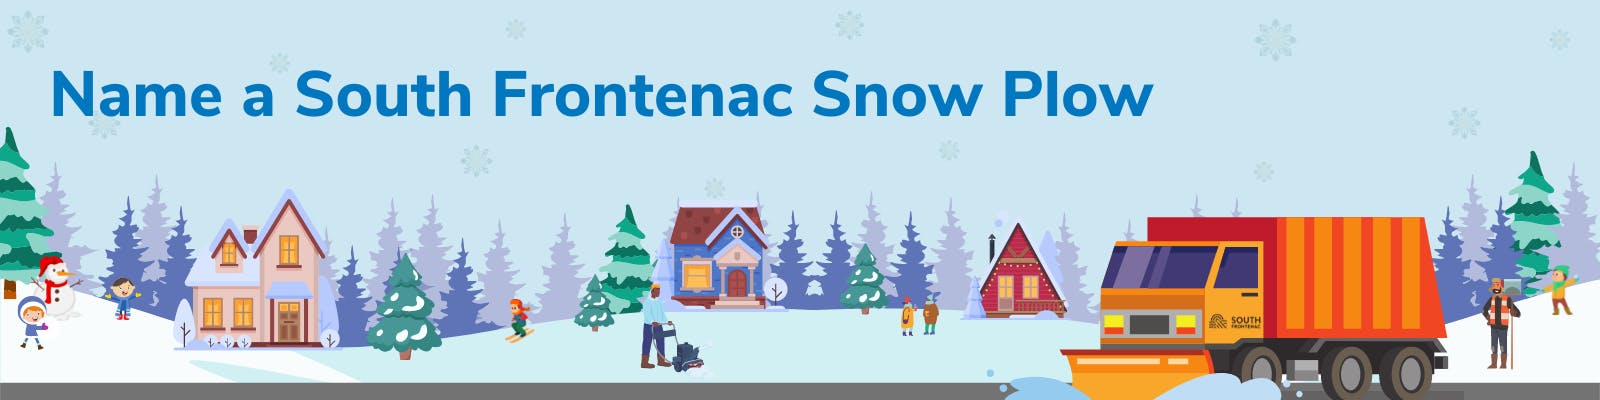 Snow plow naming contest header - winter landascape with plow, children, and people outdoors. 